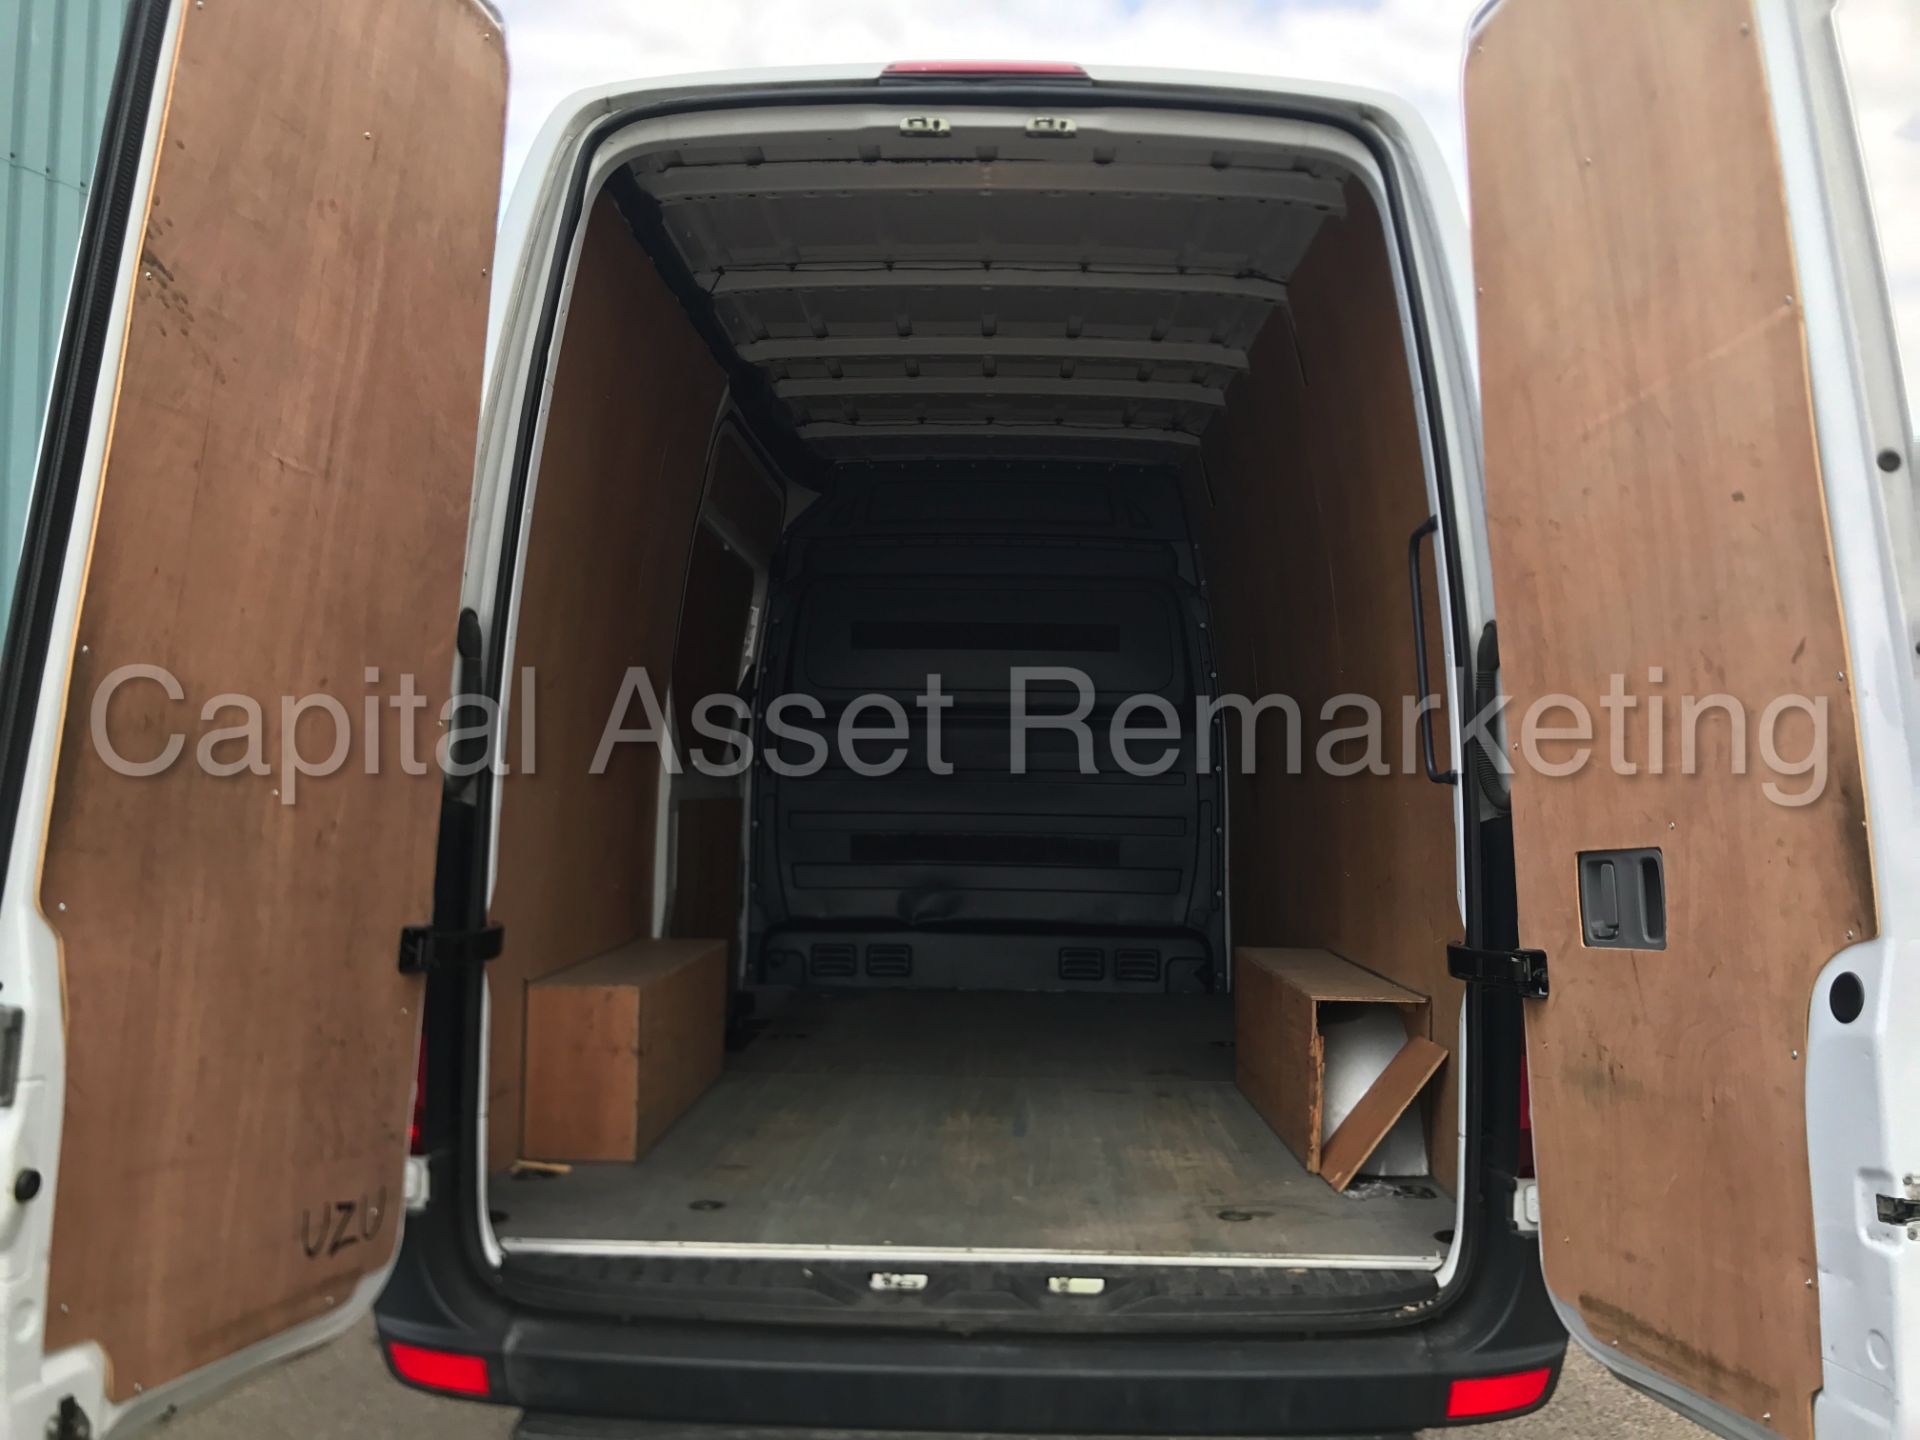 MERCEDES-BENZ SPRINTER 313 CDI 'MWB HI-ROOF' (2014) '130 BHP - 6 SPEED' (1 COMPANY OWNER FROM NEW) - Image 15 of 22